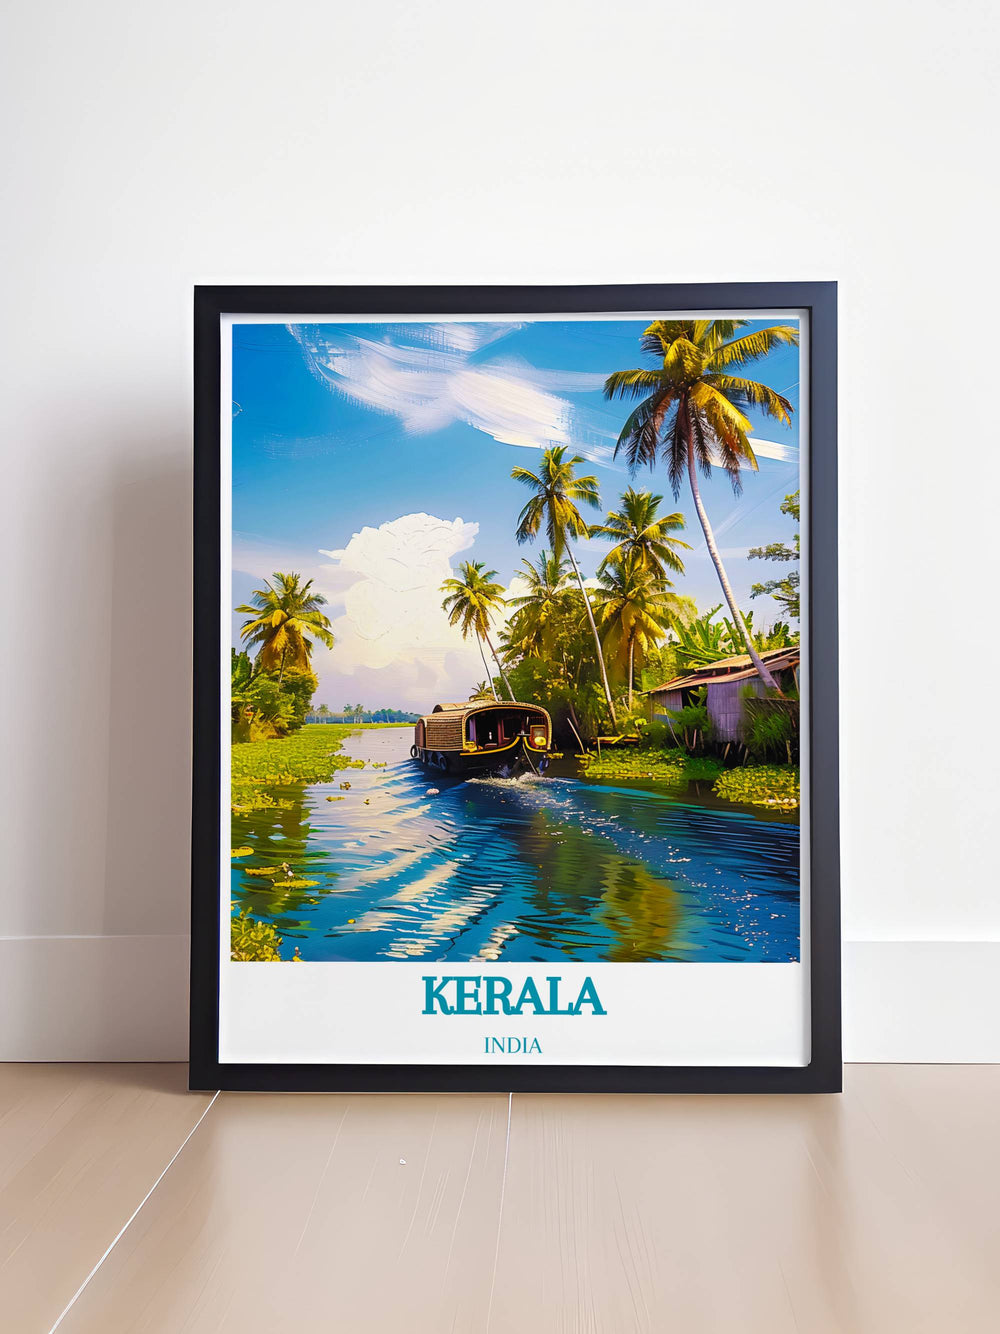 Framed print of the Alleppey backwaters showcasing traditional houseboats and serene water scenes ideal for peaceful home decor